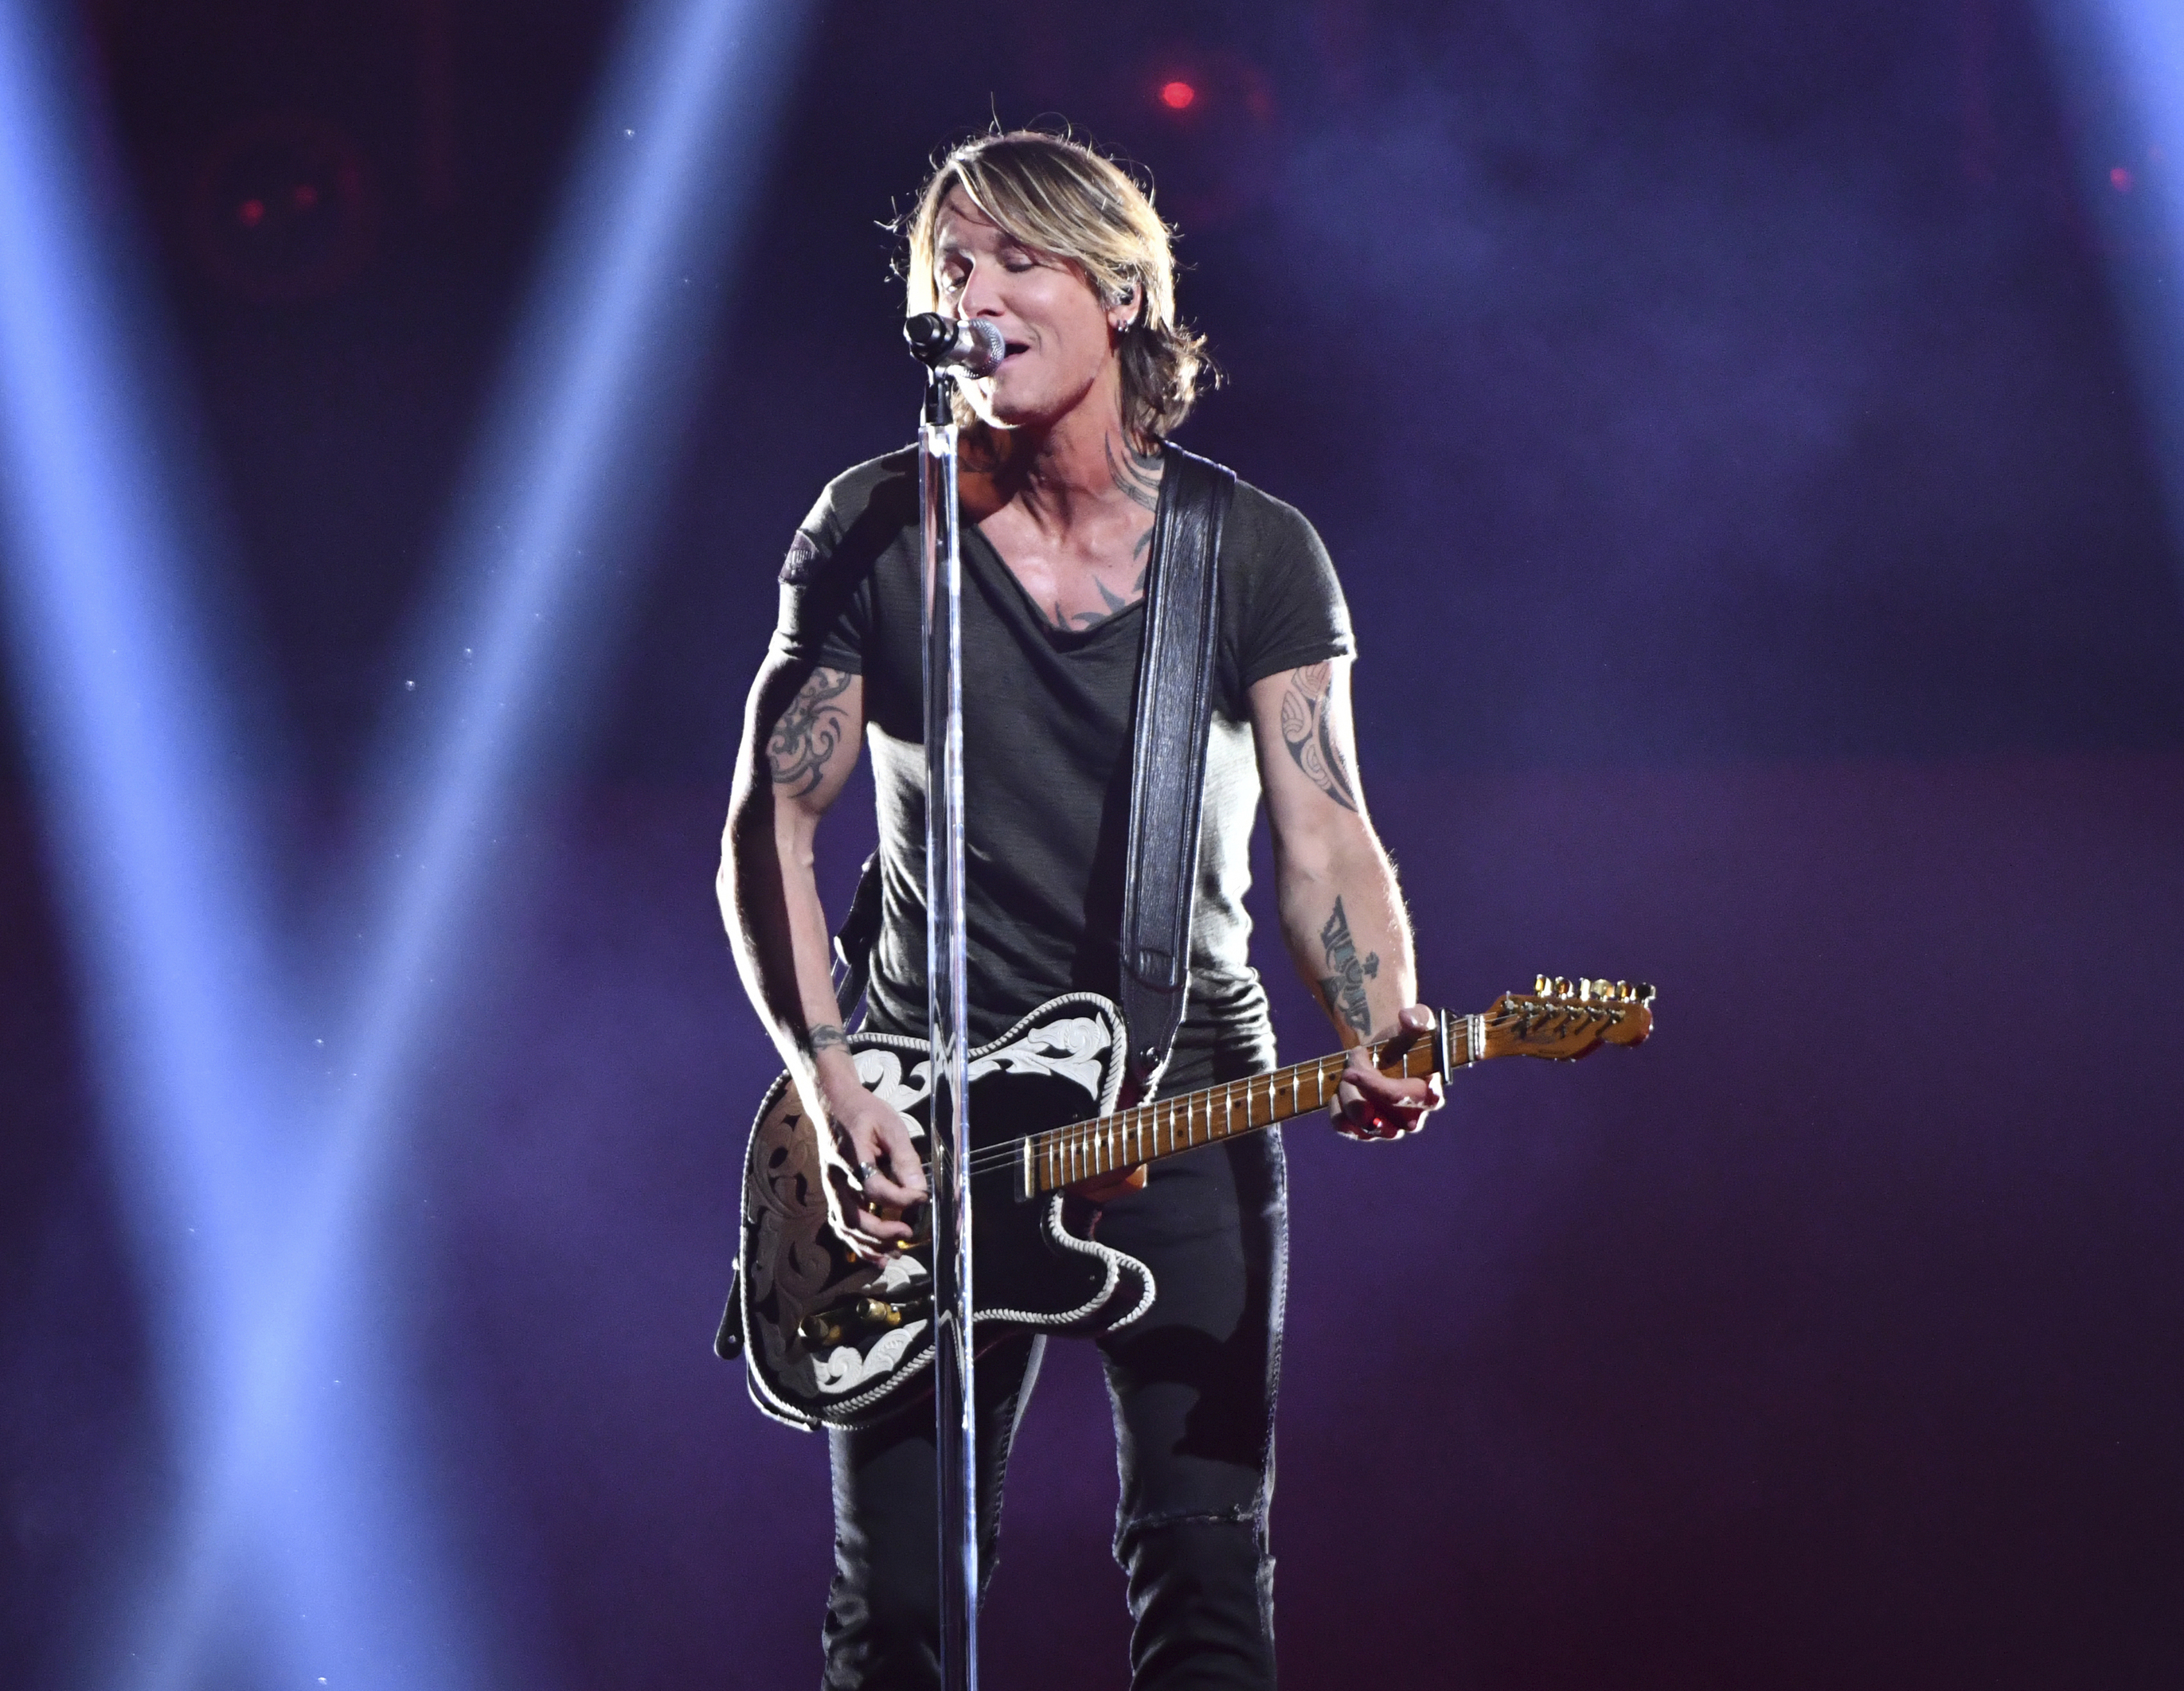 Keith Urban finds musical connections across genre lines ABC27